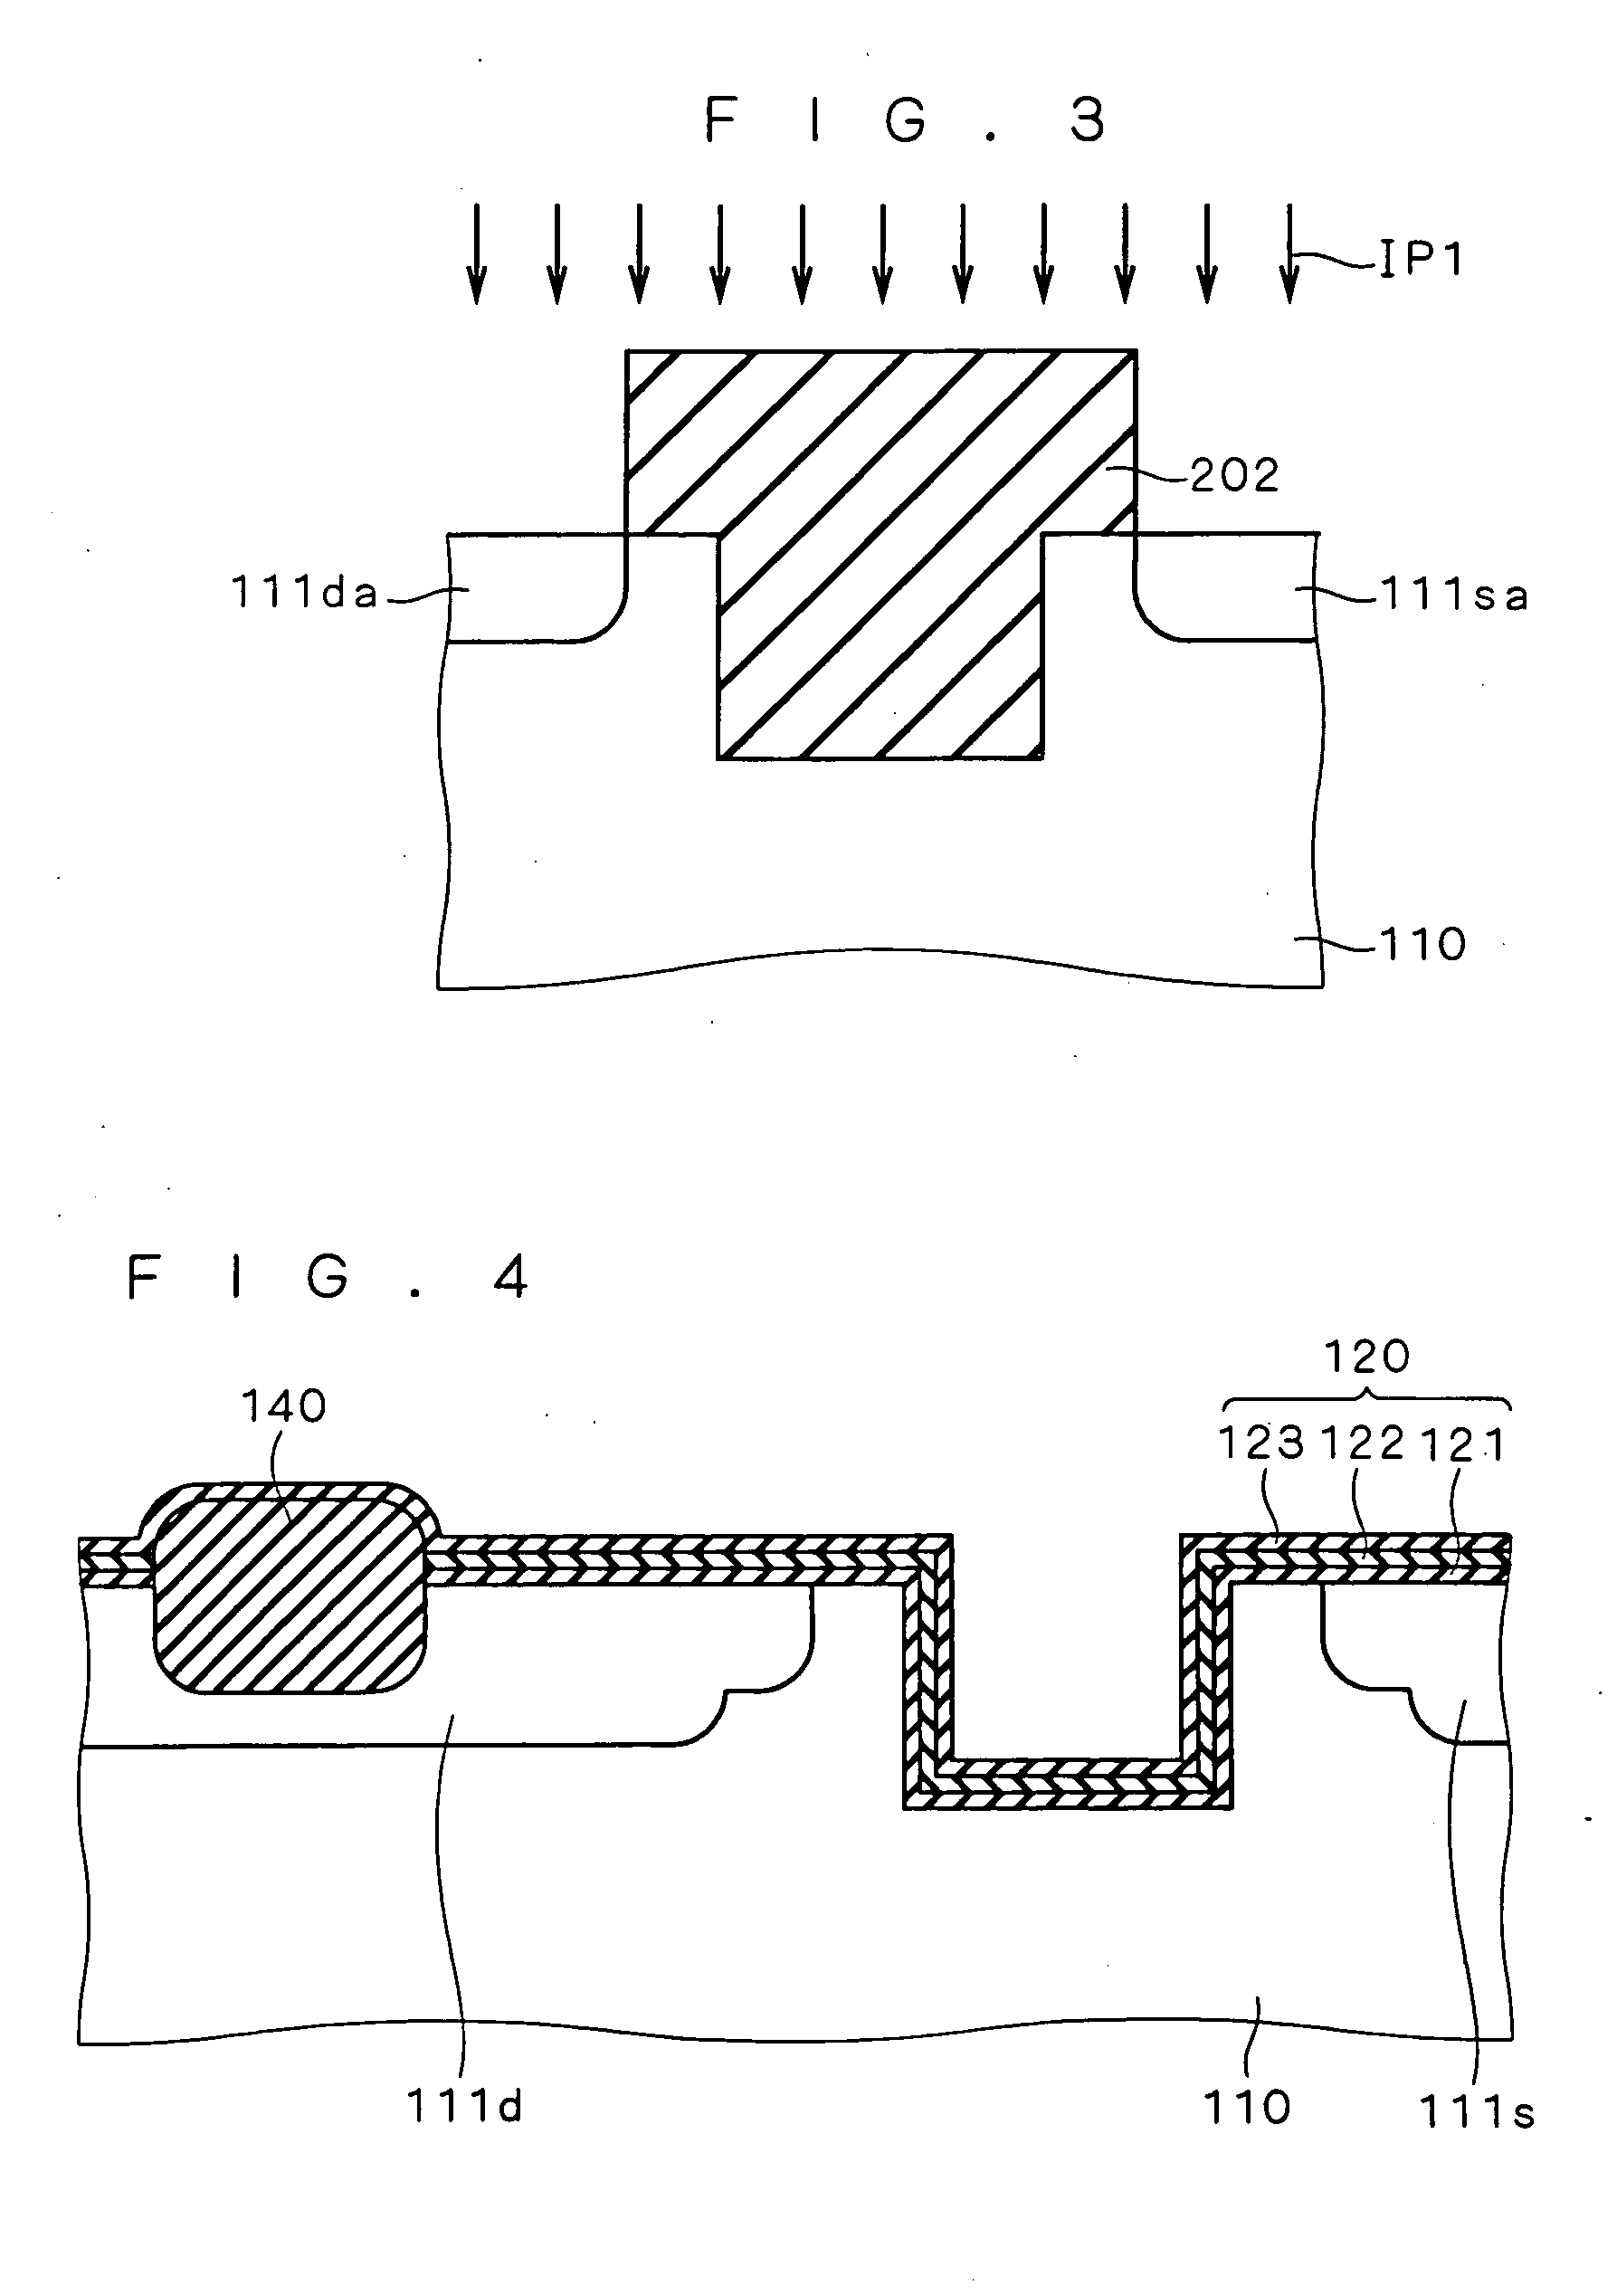 Semiconductor device with a metal insulator semiconductor transistor